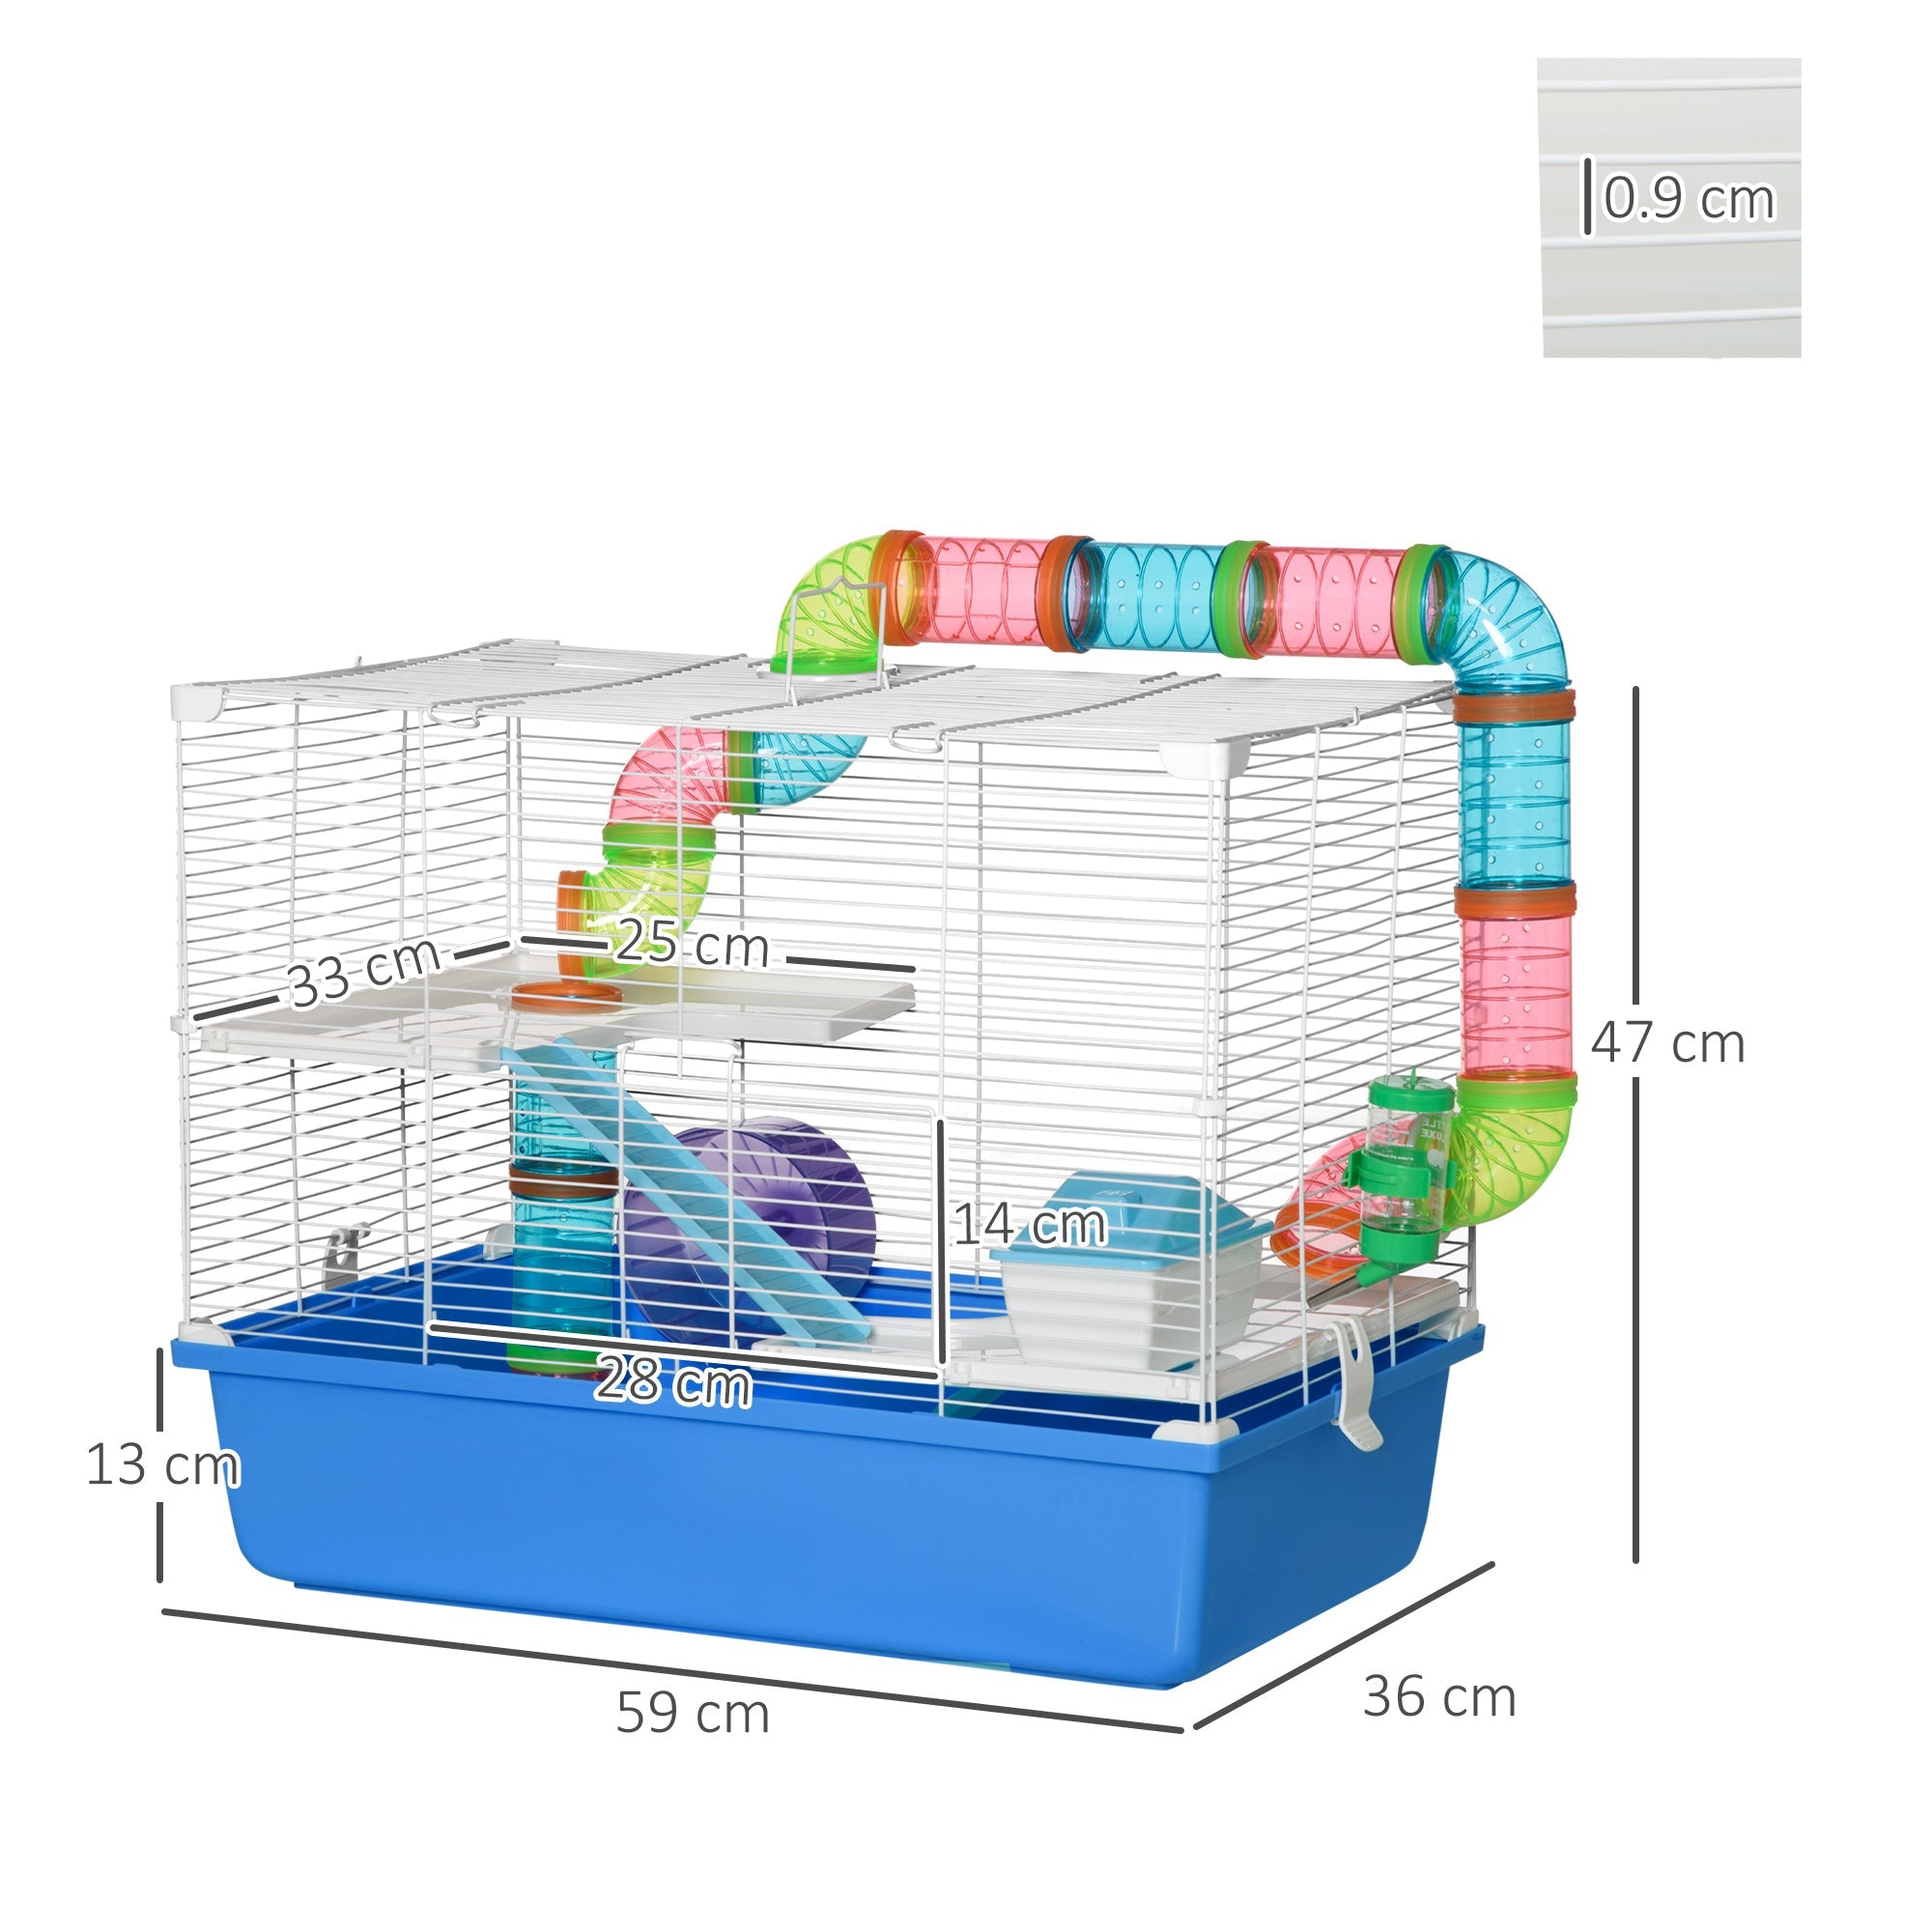 Large Hamster Cage, 3-Level Small Rodents House, with Tube Tunnel, Exercise Wheel, Water Bottle, Food Dish, Ramps, Hut, 59 x 36 x 47 cm, Blue-2